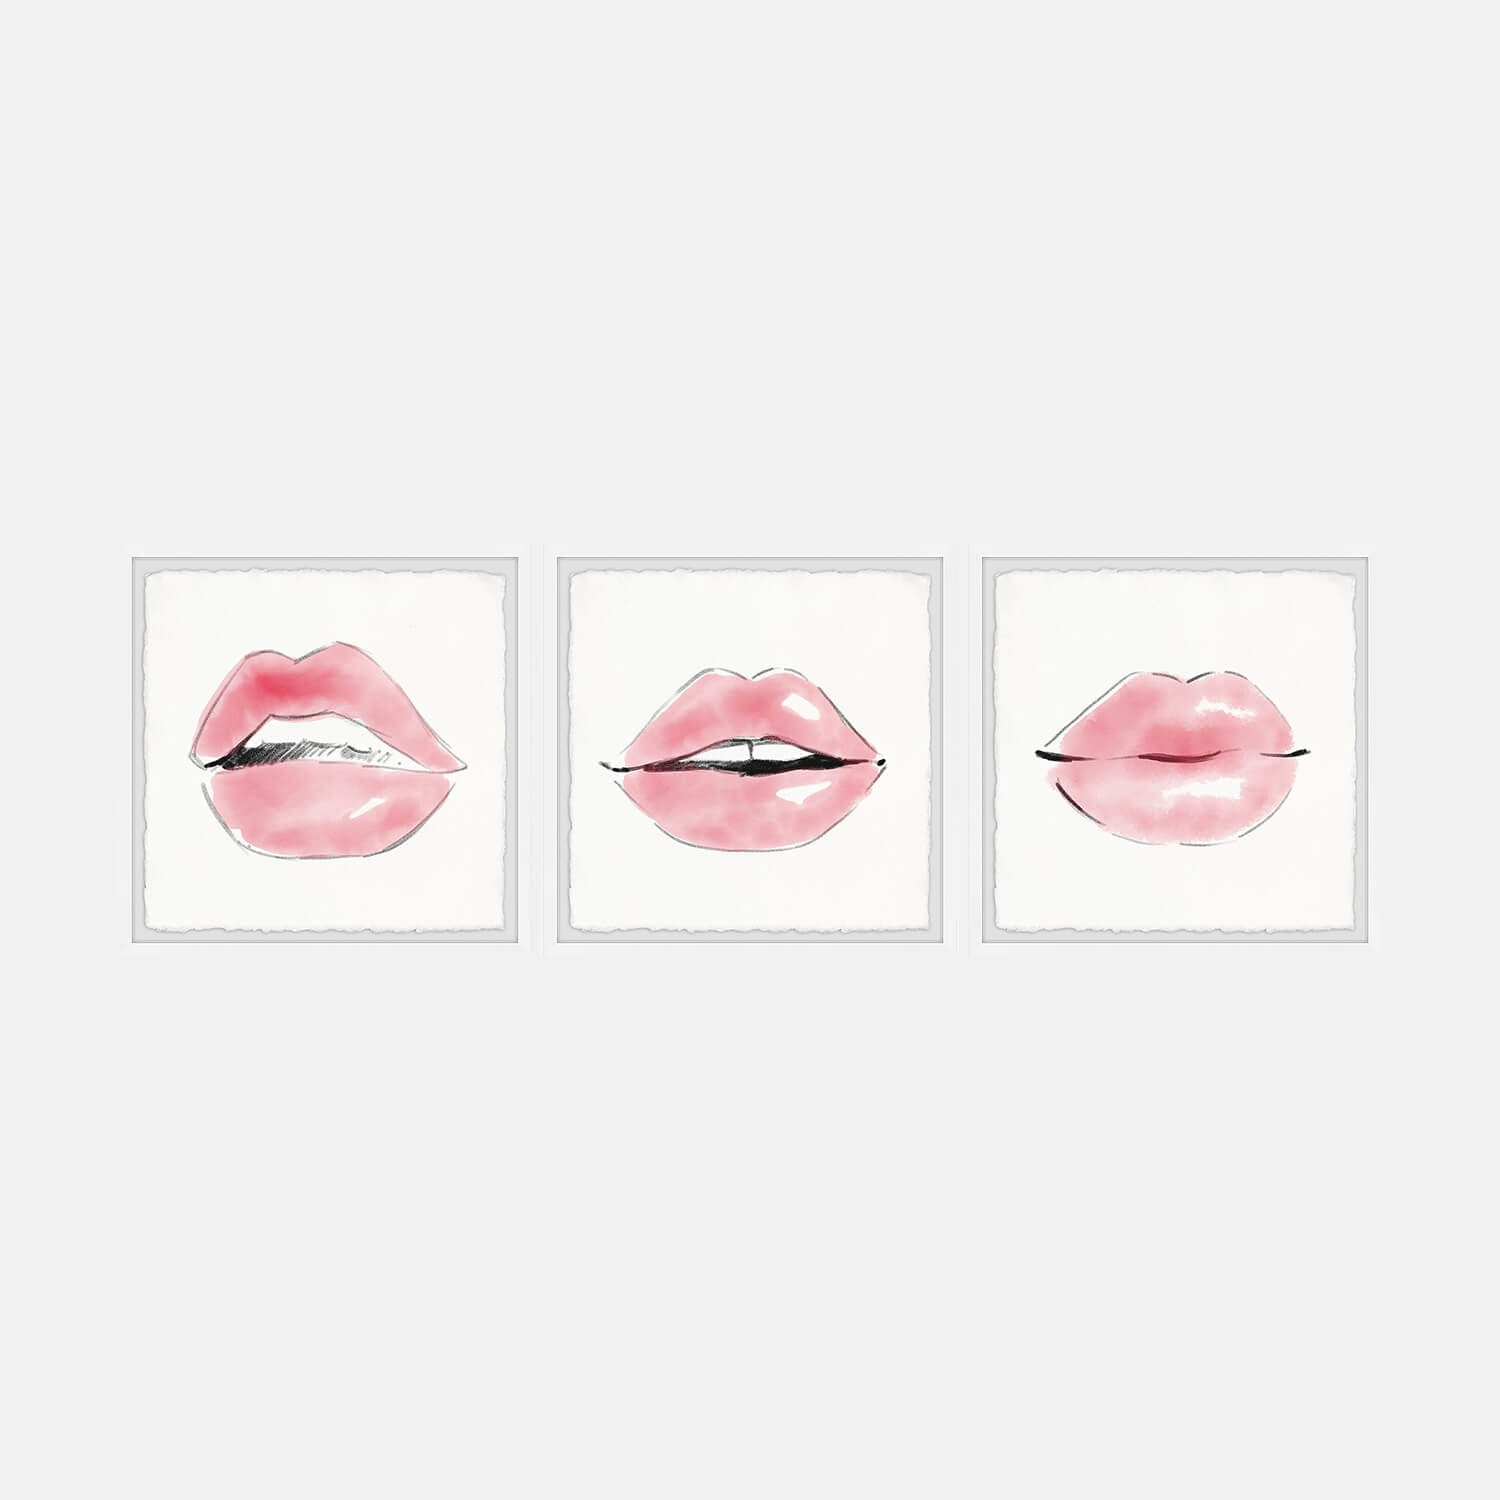 How to draw Lips by pencil step by step - YouTube